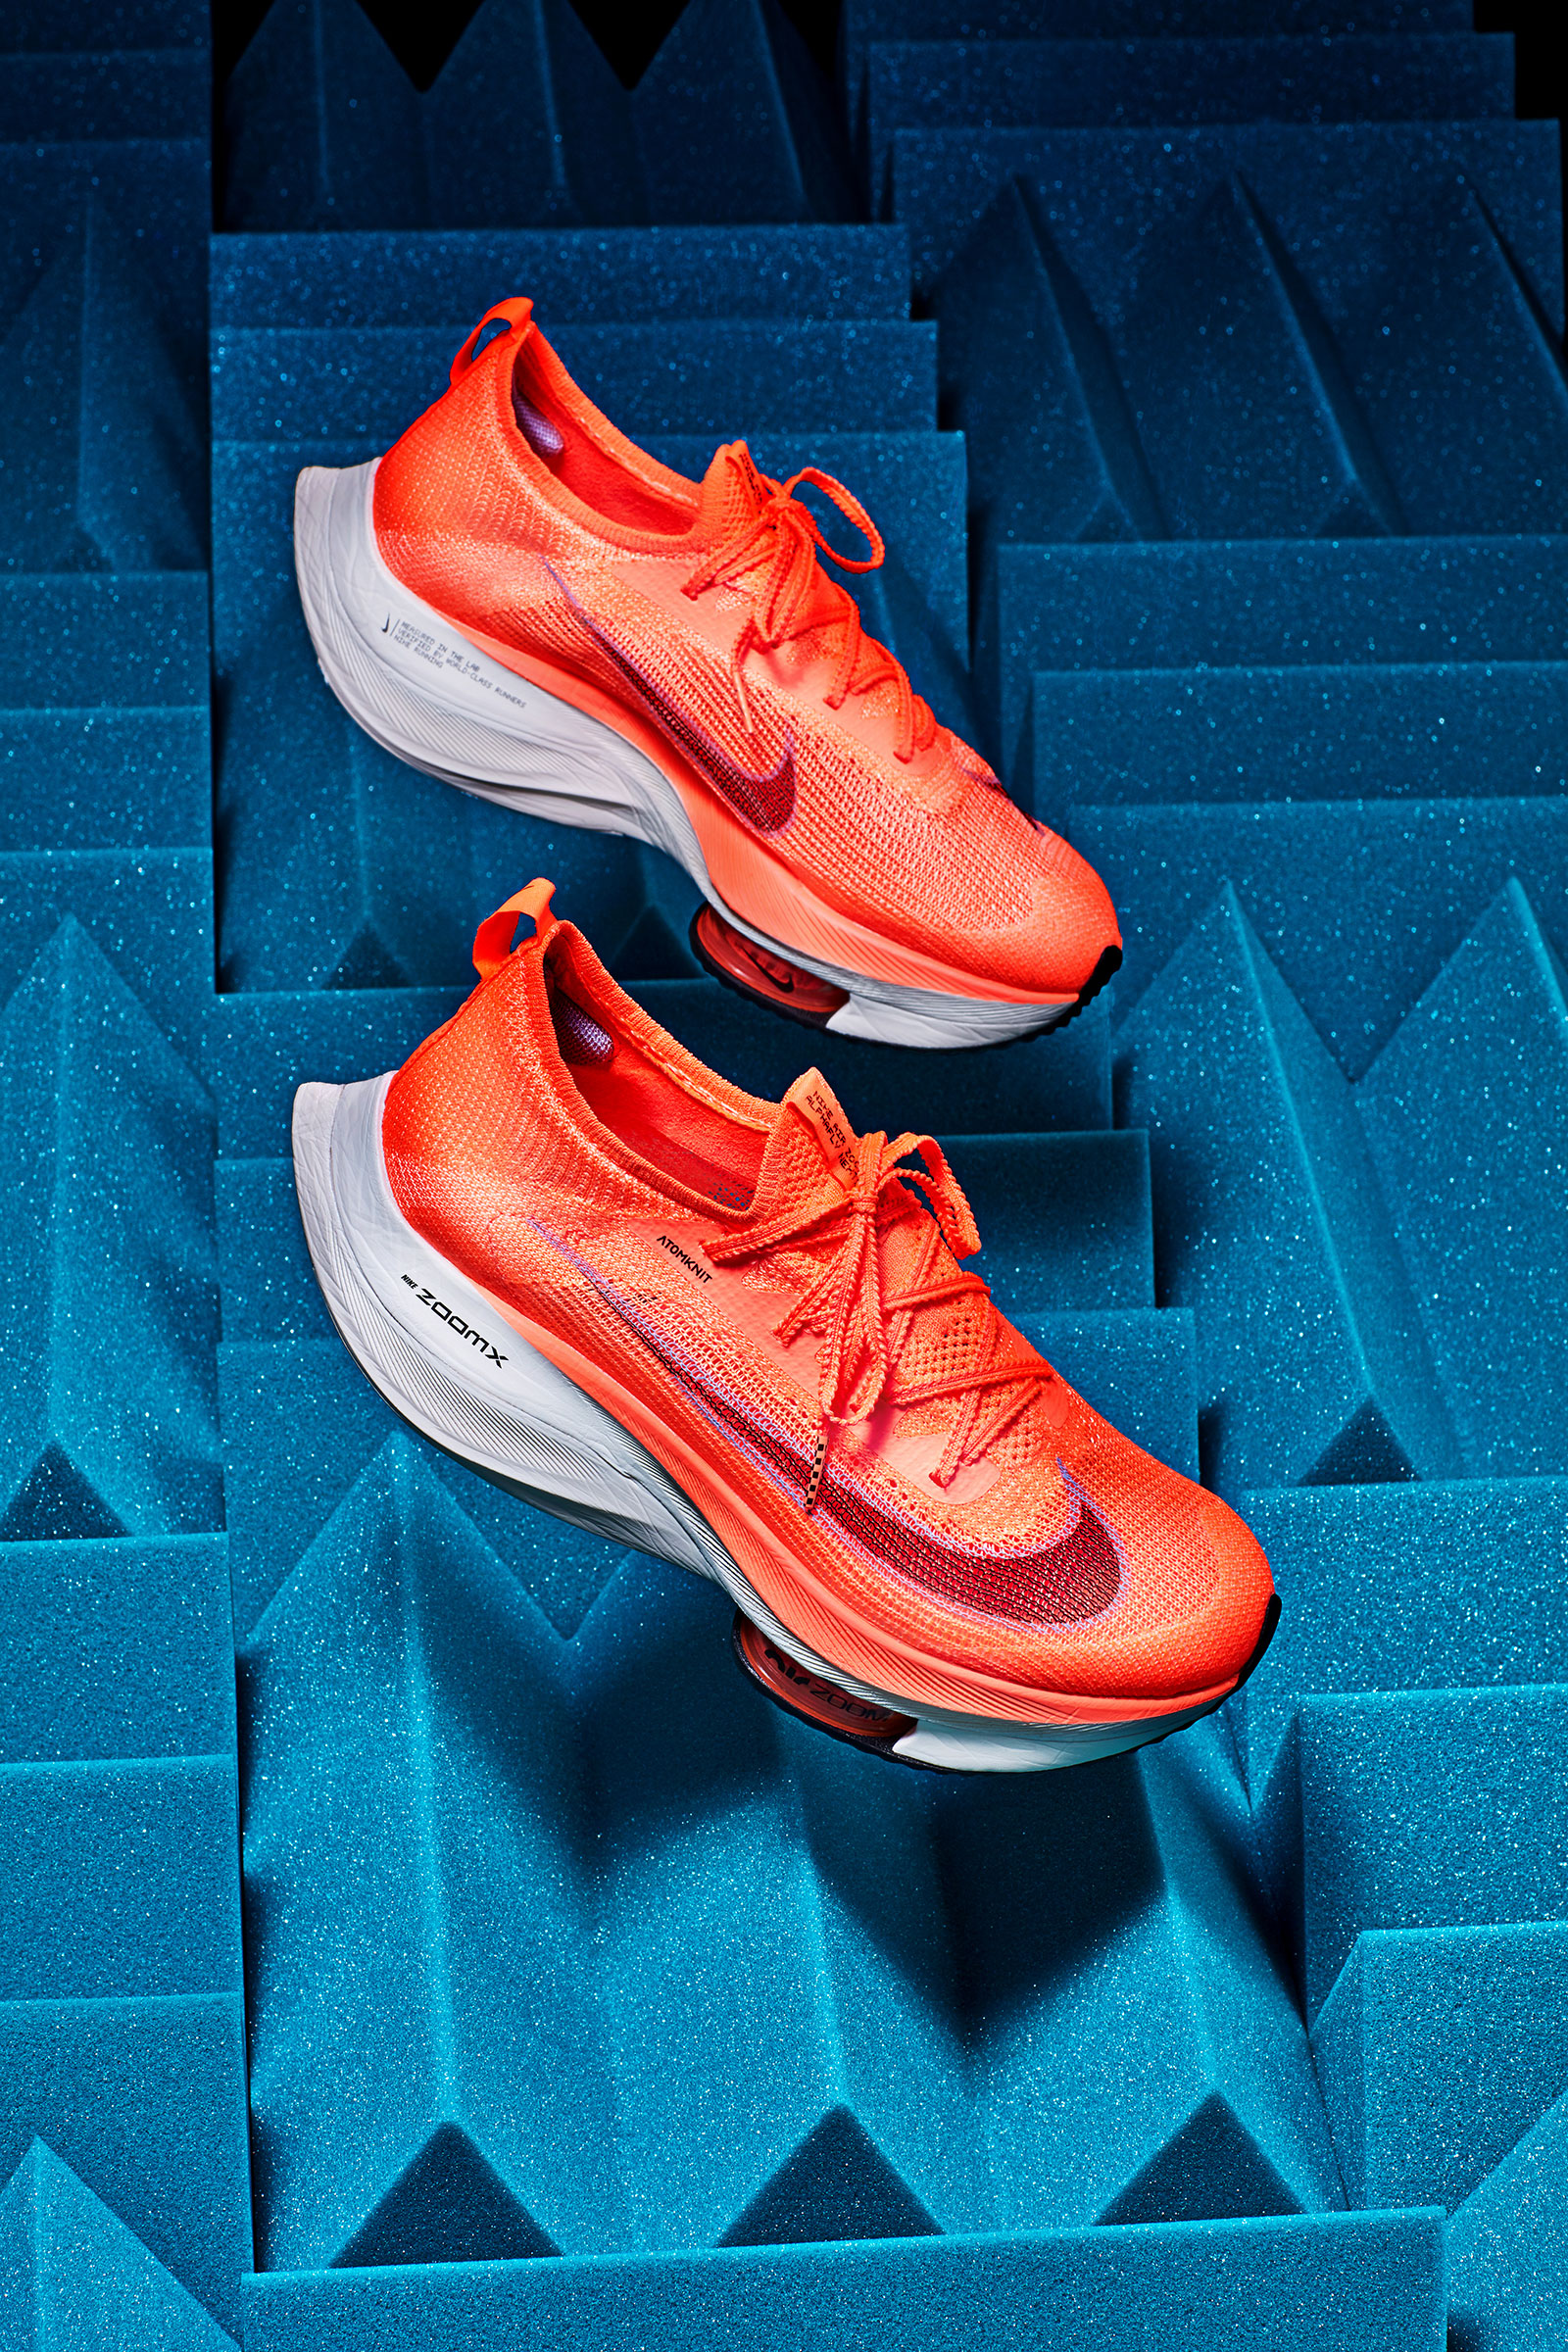 Fascinating the same Dismantle Nike Air Zoom Alphafly Next%: The 100 Best Inventions of 2020 | TIME